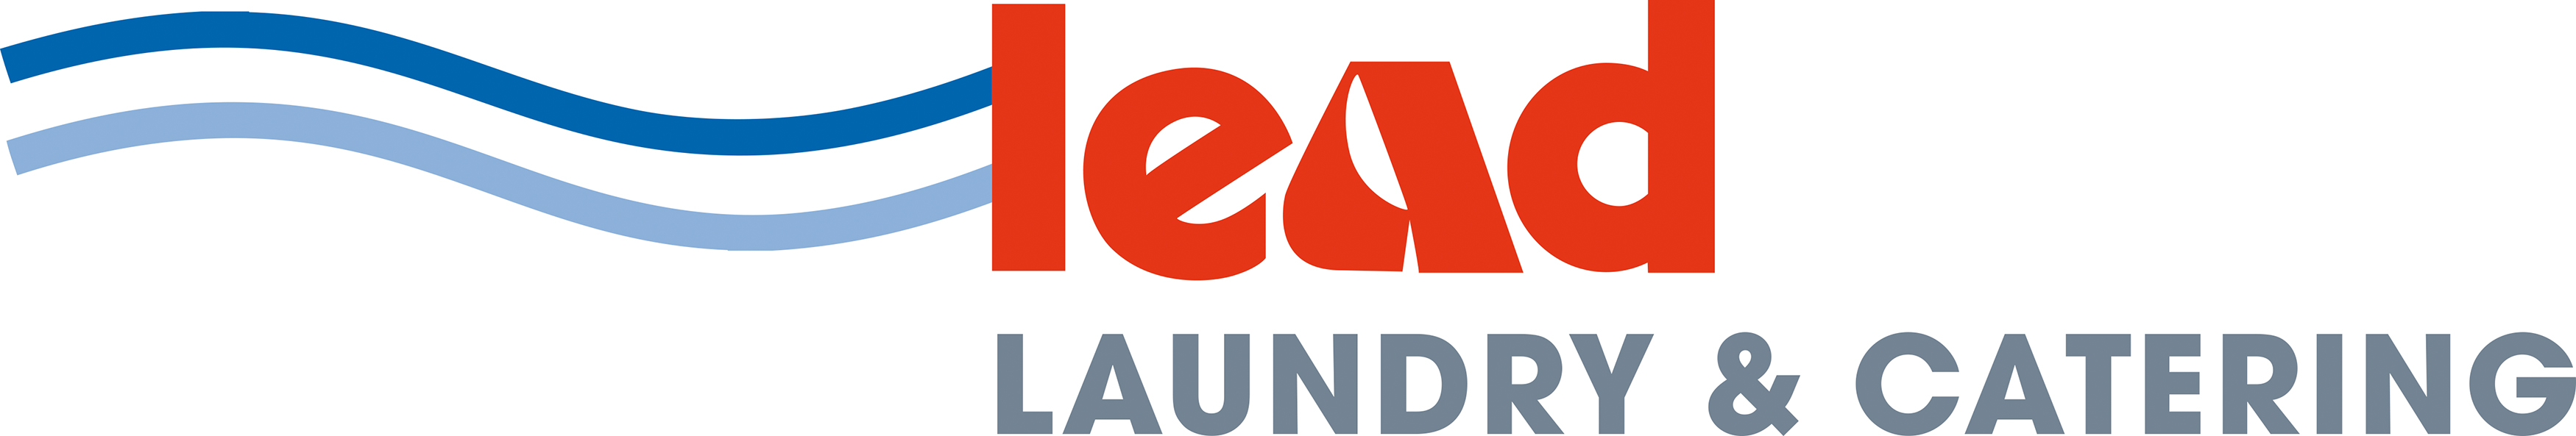 Lead Laundry & Catering - Cape Town logo